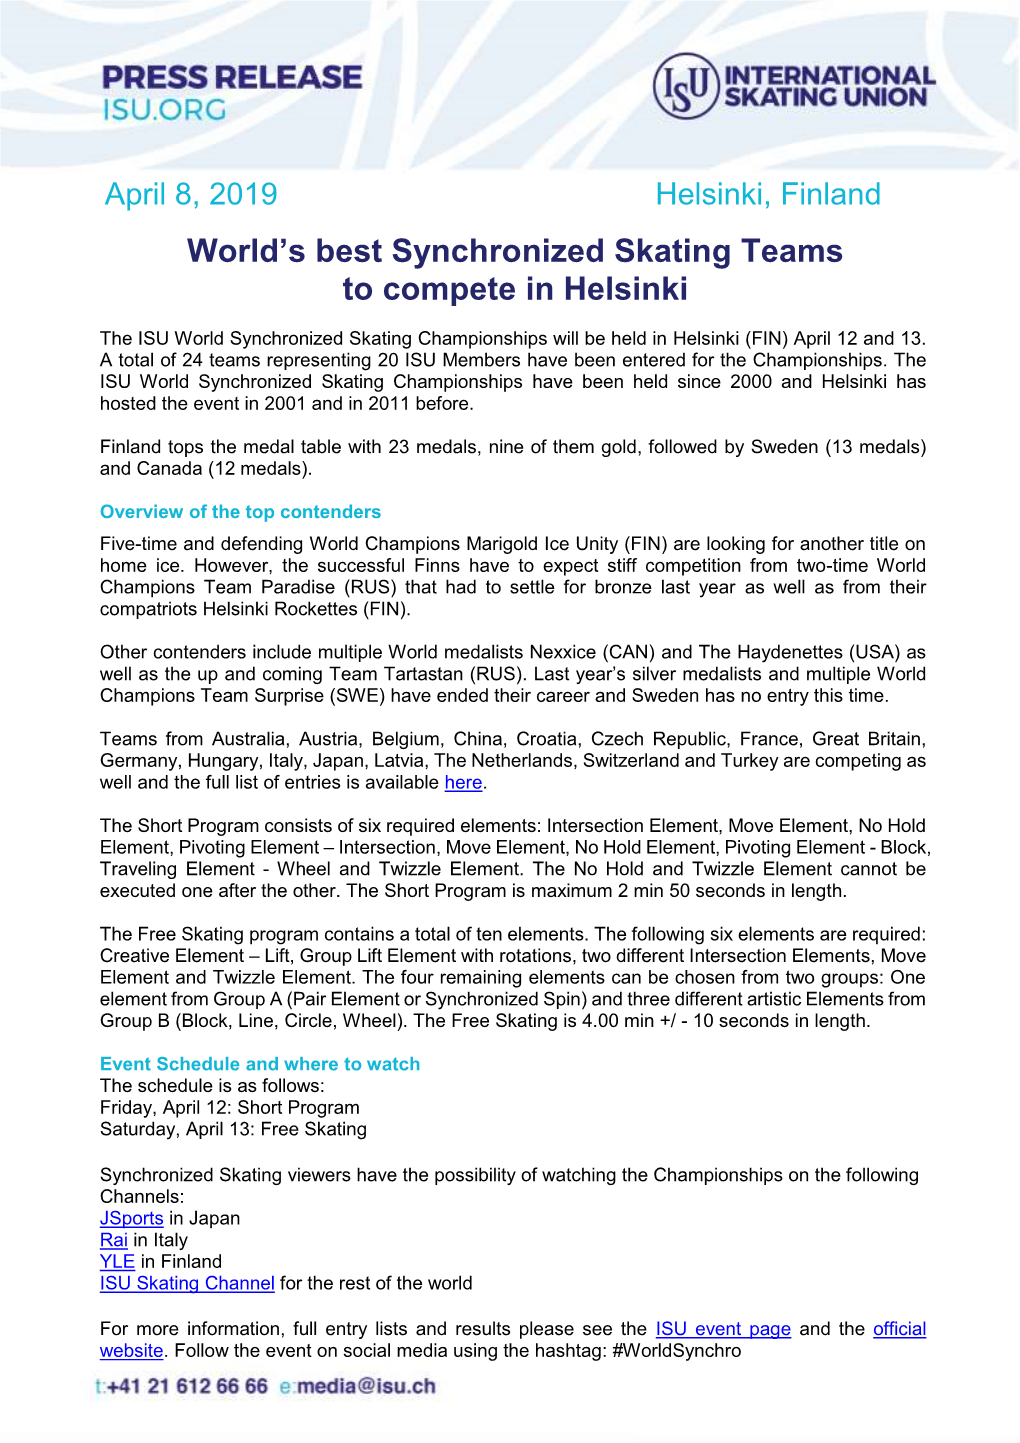 World's Best Synchronized Skating Teams to Compete in Helsinki